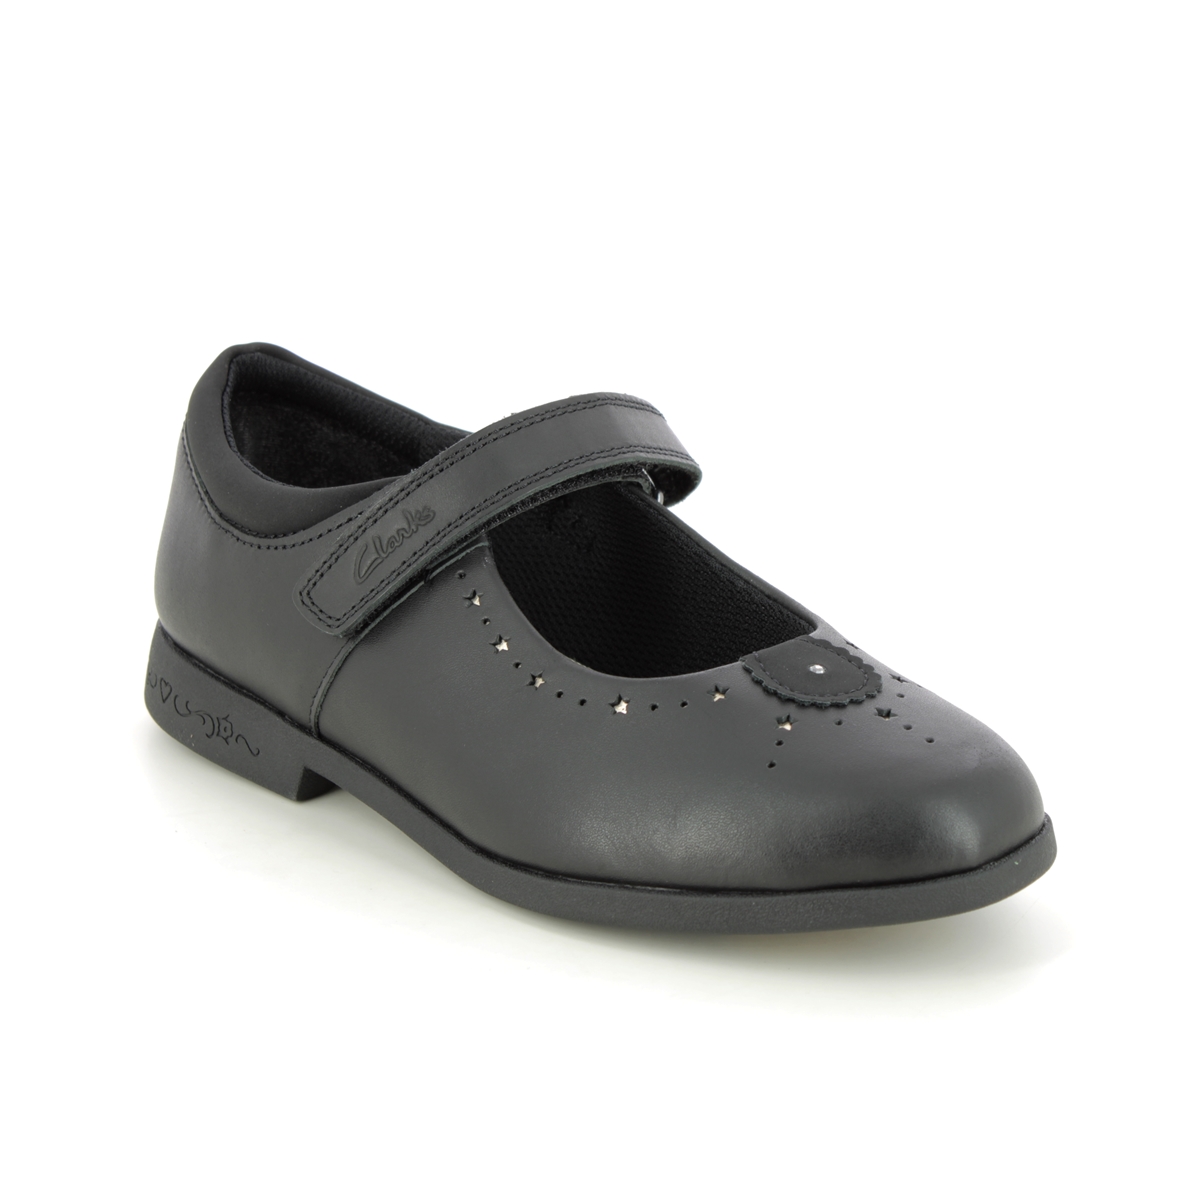 Clarks Magic Step Mj O Black Leather Kids Girls School Shoes 697056F In Size 2 In Plain Black Leather F Width Fitting Regular Fit For School For kids